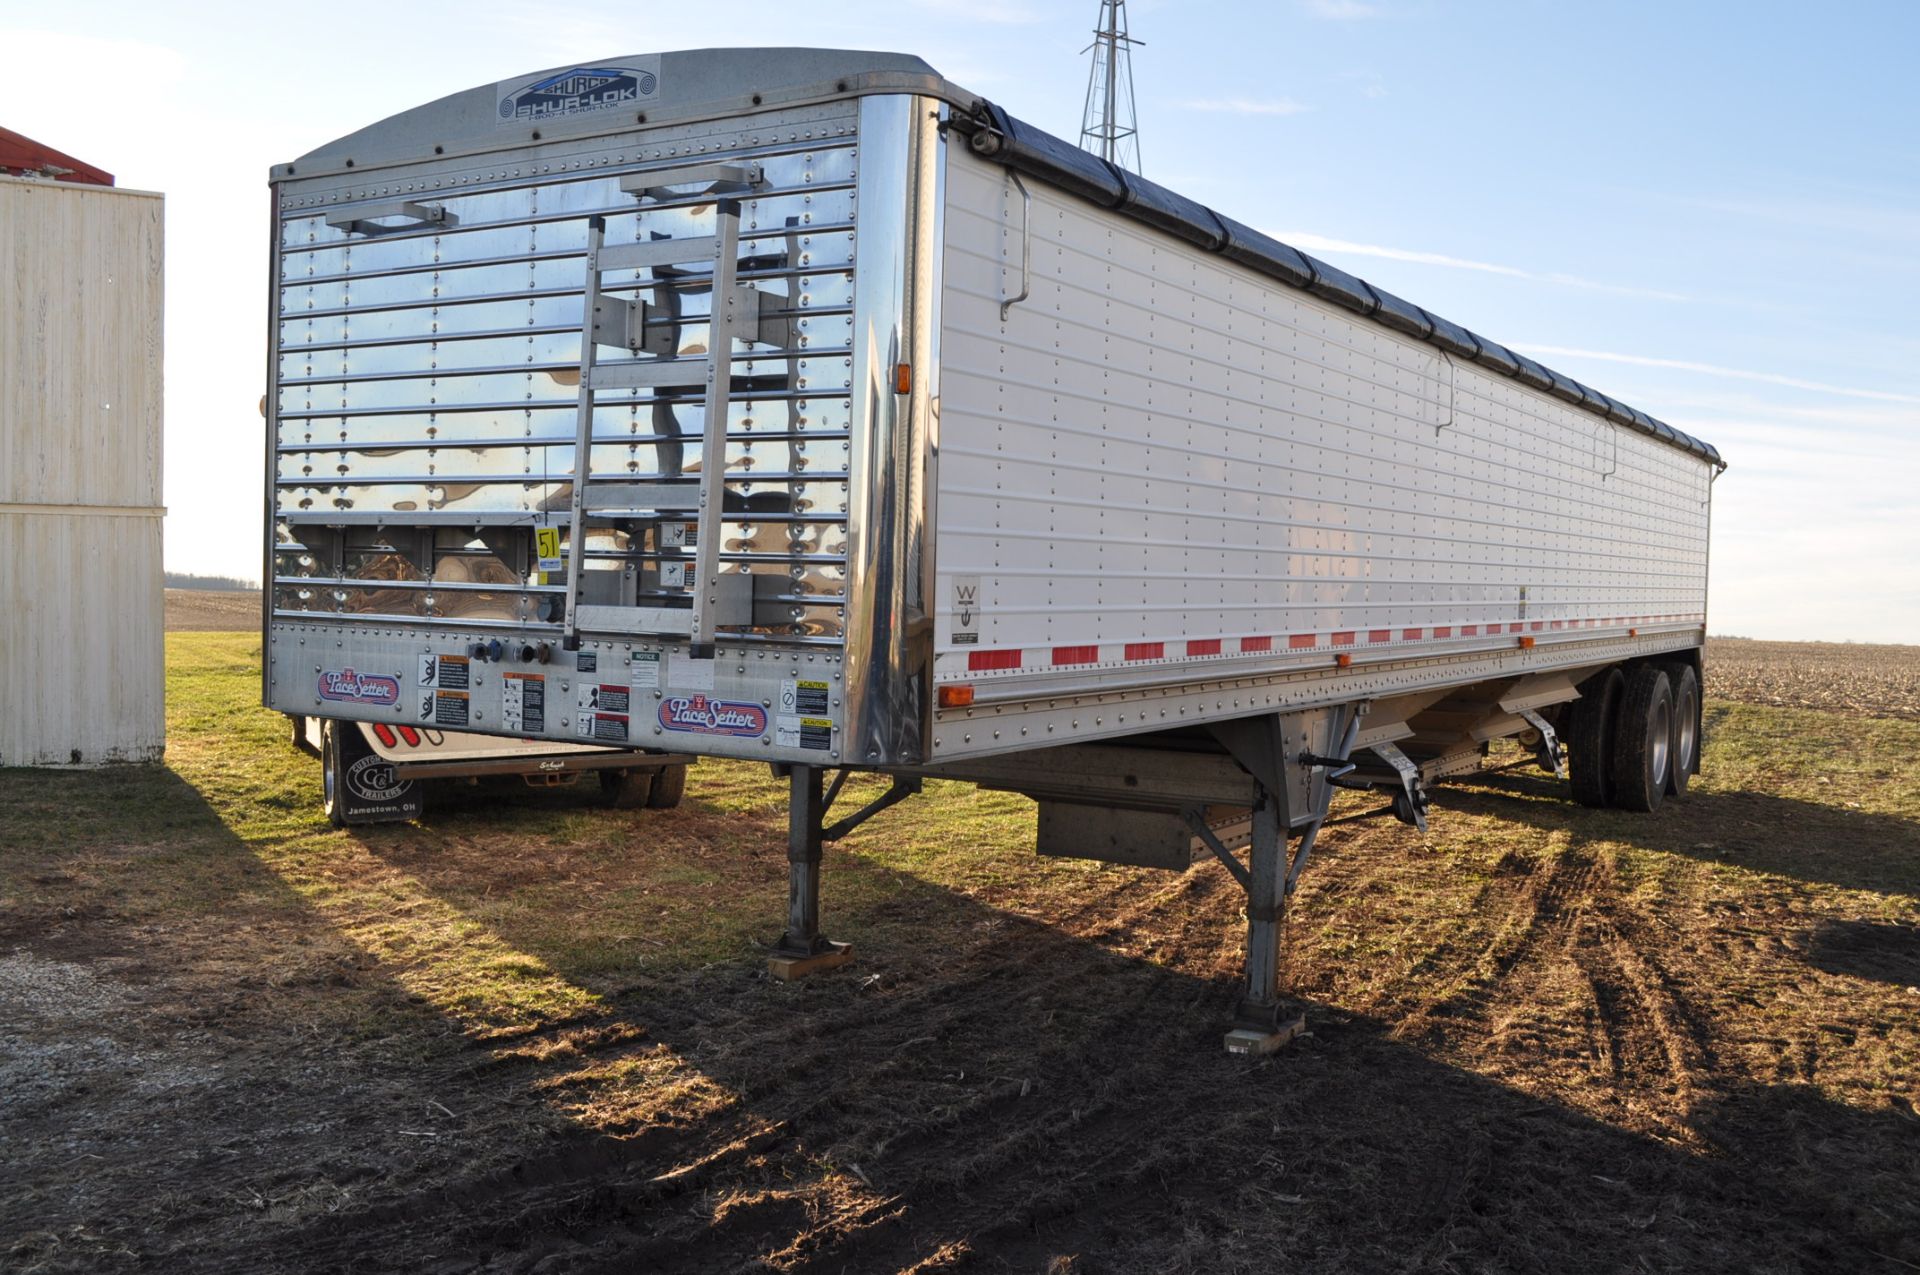 2000 40’ Wilson Grain Trailer ss front and rear panels, spring ride, aluminum outer and steel